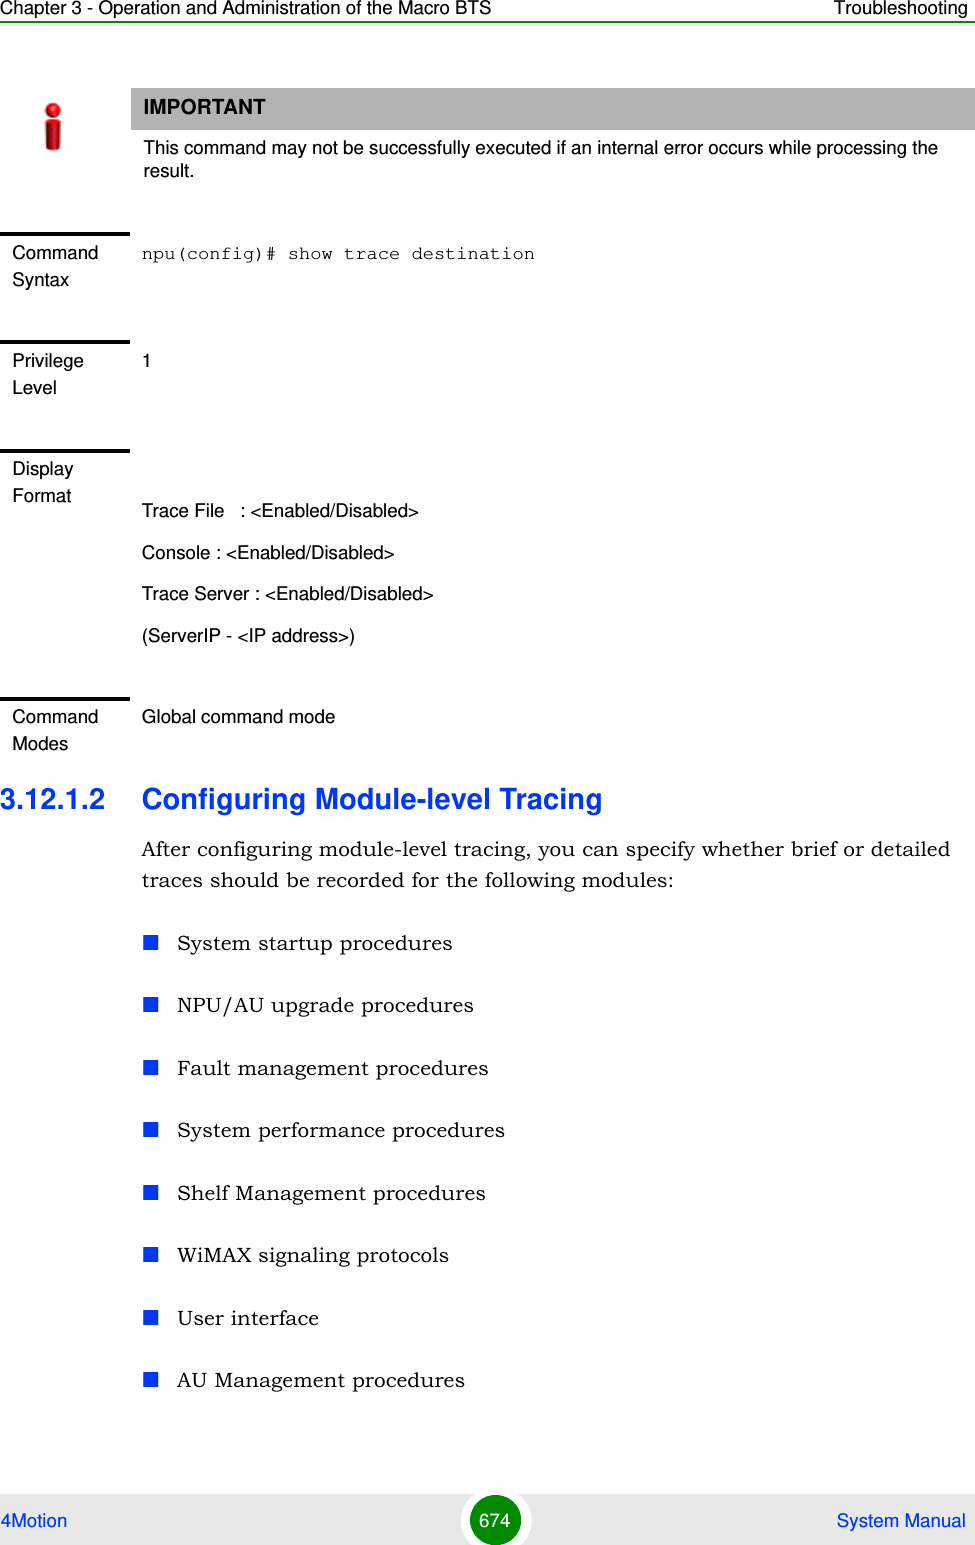 Chapter 3 - Operation and Administration of the Macro BTS Troubleshooting4Motion 674  System Manual3.12.1.2 Configuring Module-level TracingAfter configuring module-level tracing, you can specify whether brief or detailed traces should be recorded for the following modules:System startup proceduresNPU/AU upgrade proceduresFault management proceduresSystem performance proceduresShelf Management proceduresWiMAX signaling protocolsUser interfaceAU Management proceduresIMPORTANTThis command may not be successfully executed if an internal error occurs while processing the result.Command Syntaxnpu(config)# show trace destinationPrivilege Level1Display Format Trace File   : &lt;Enabled/Disabled&gt;Console : &lt;Enabled/Disabled&gt;Trace Server : &lt;Enabled/Disabled&gt;(ServerIP - &lt;IP address&gt;)Command ModesGlobal command mode